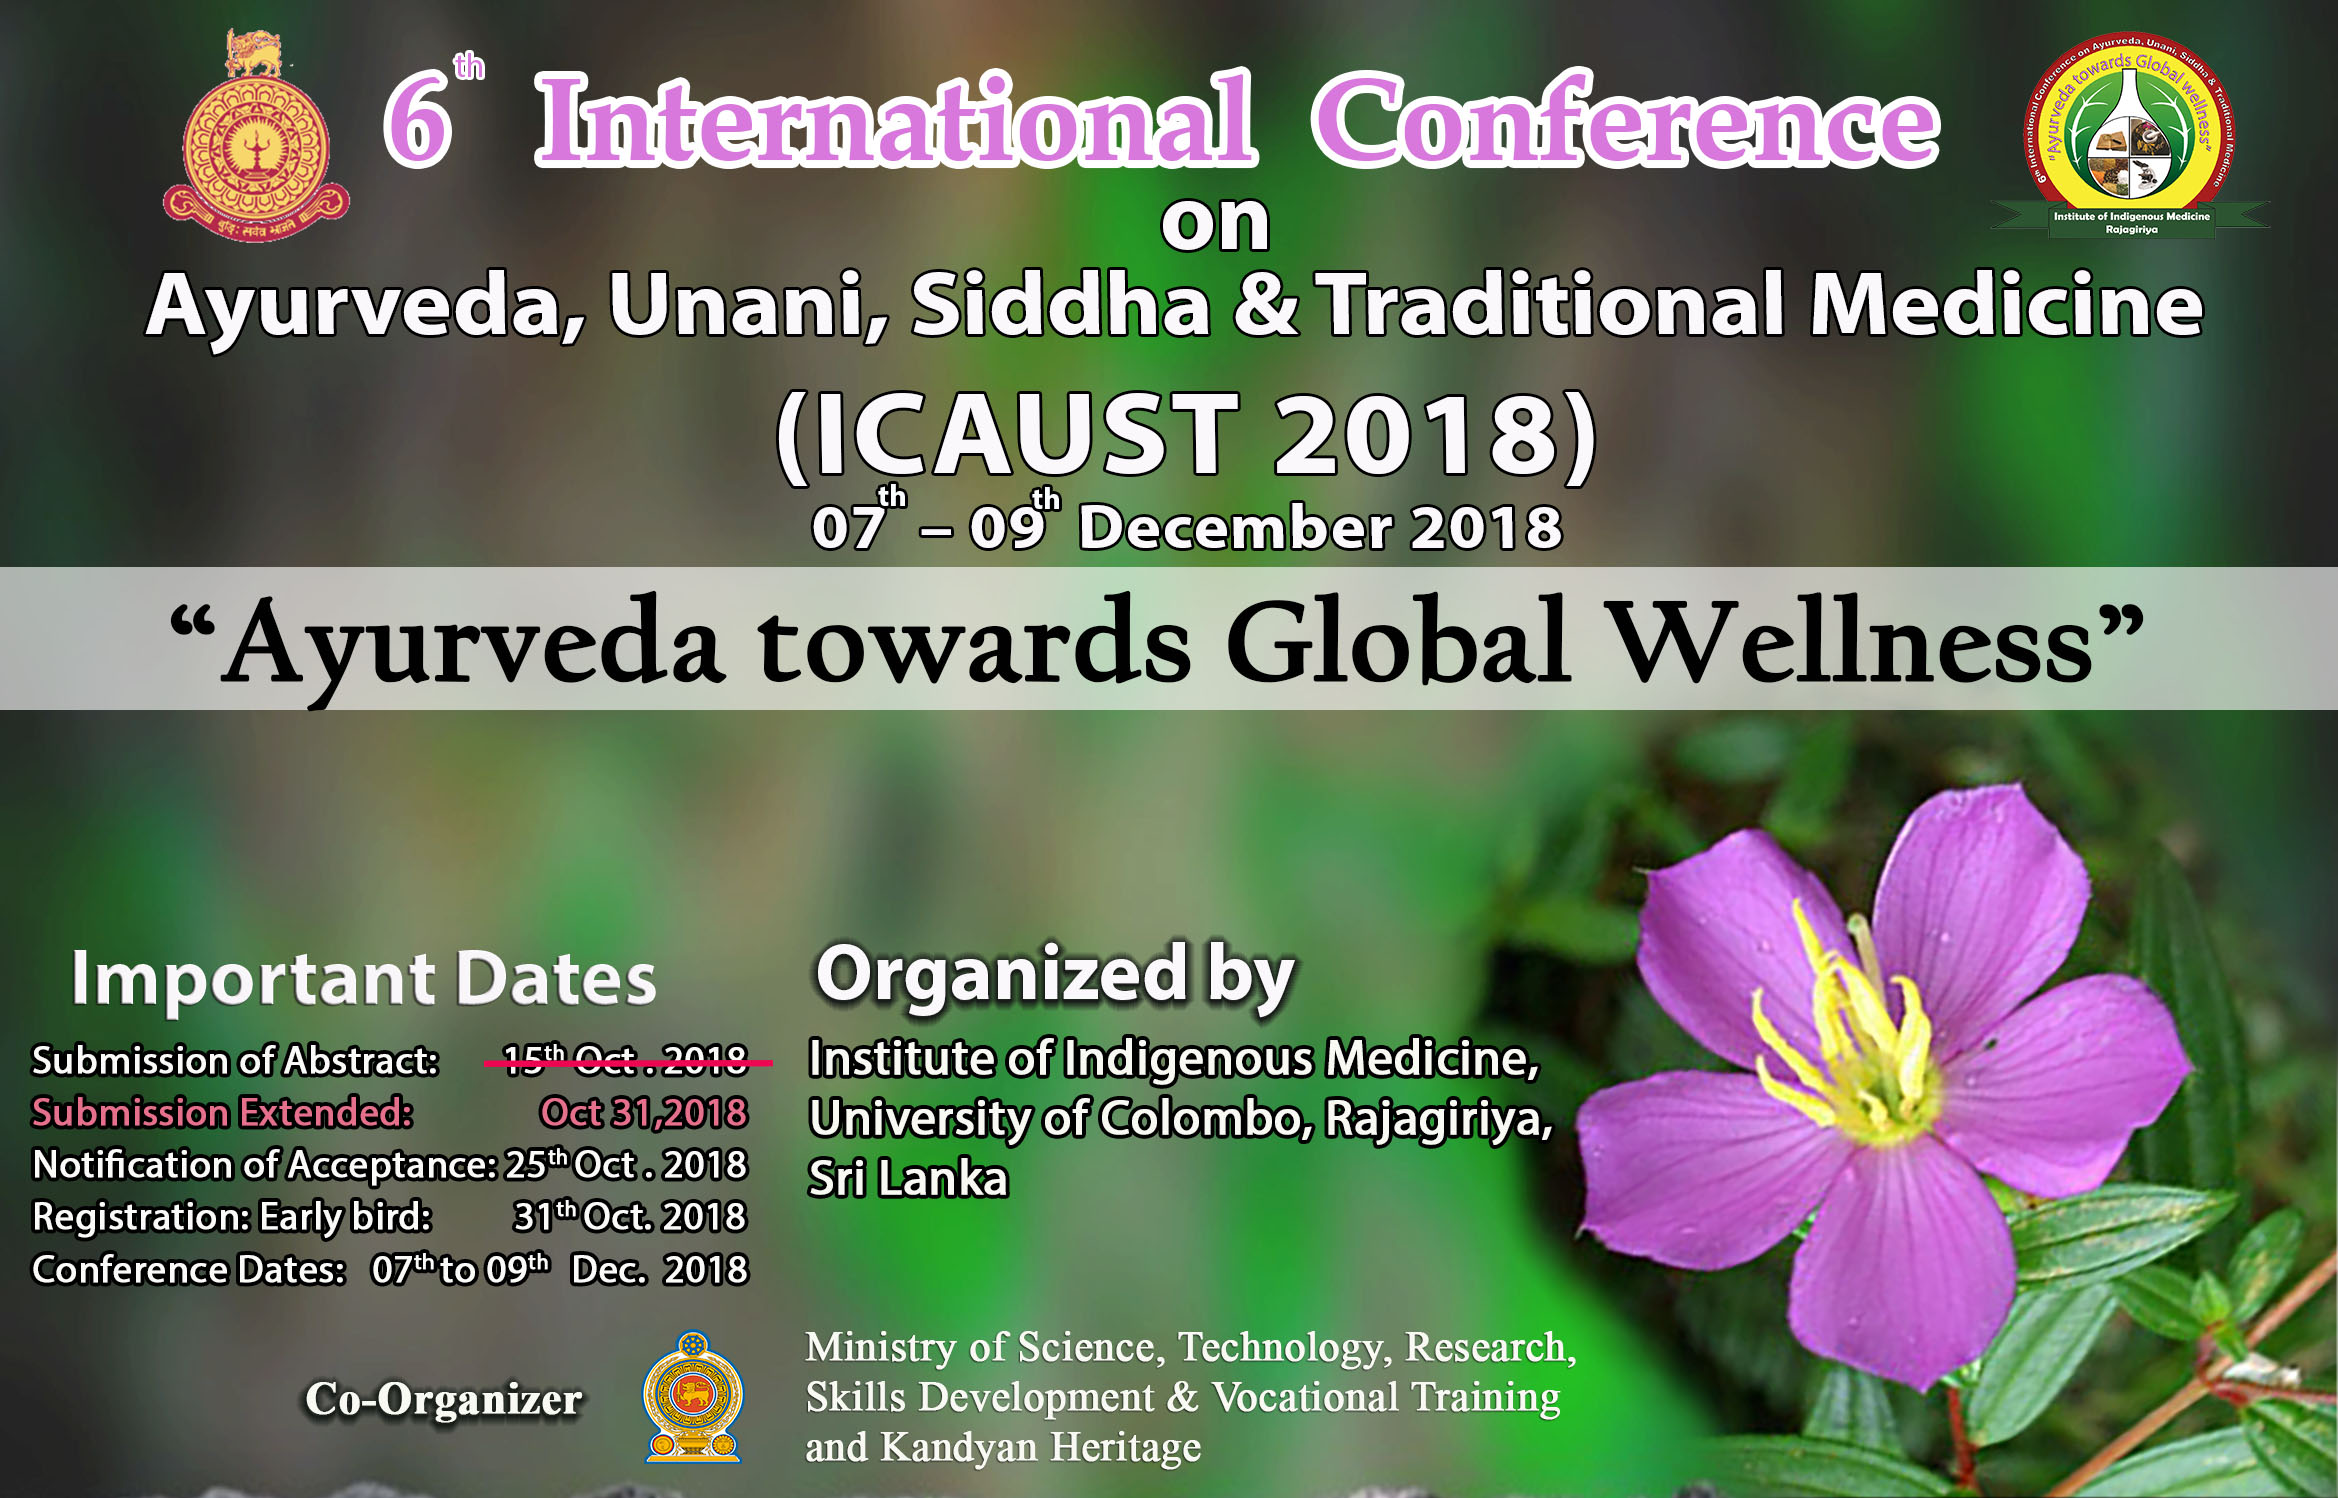 ICAUST 2018-Abstract submission deadline extended